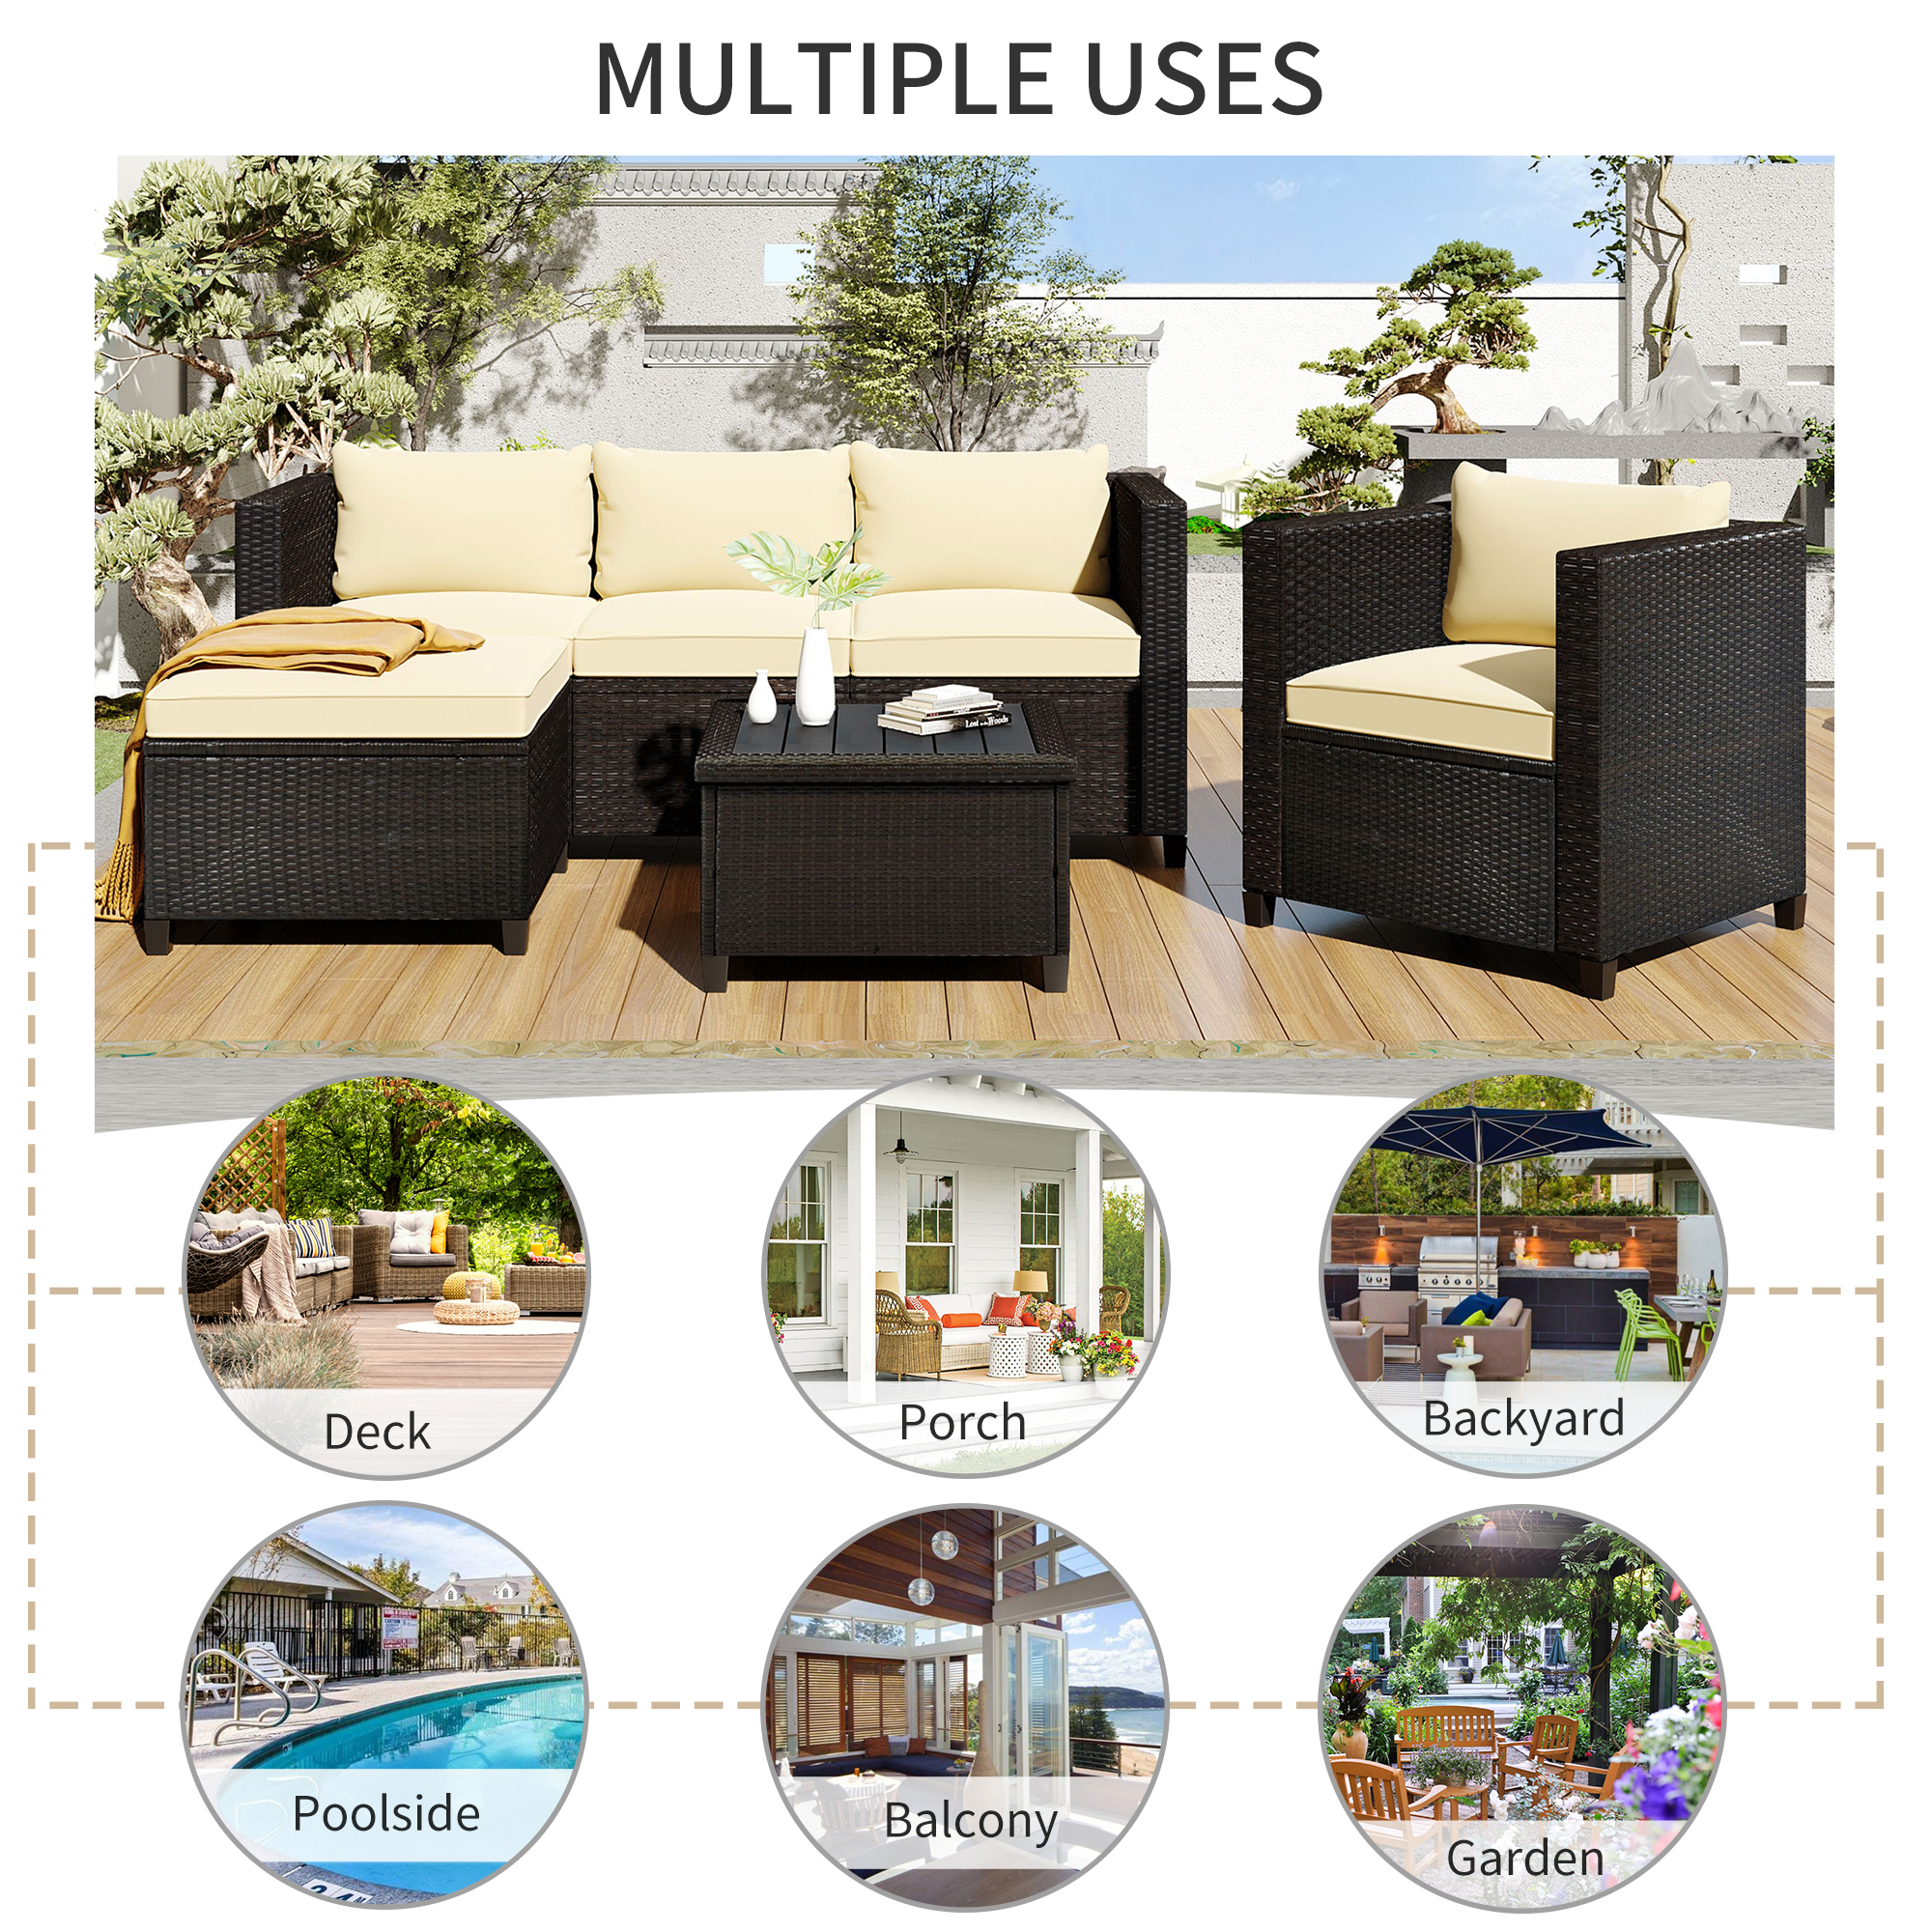 Wicker Sectional Table and Chairs Sets, 5 Pieces Outdoor Wicker Patio Furniture Set with 3-Seat Sofa and Ottoman, Armchair, Rattan Table, Cushions, for Porch Backyard Garden, SS745 - image 3 of 11